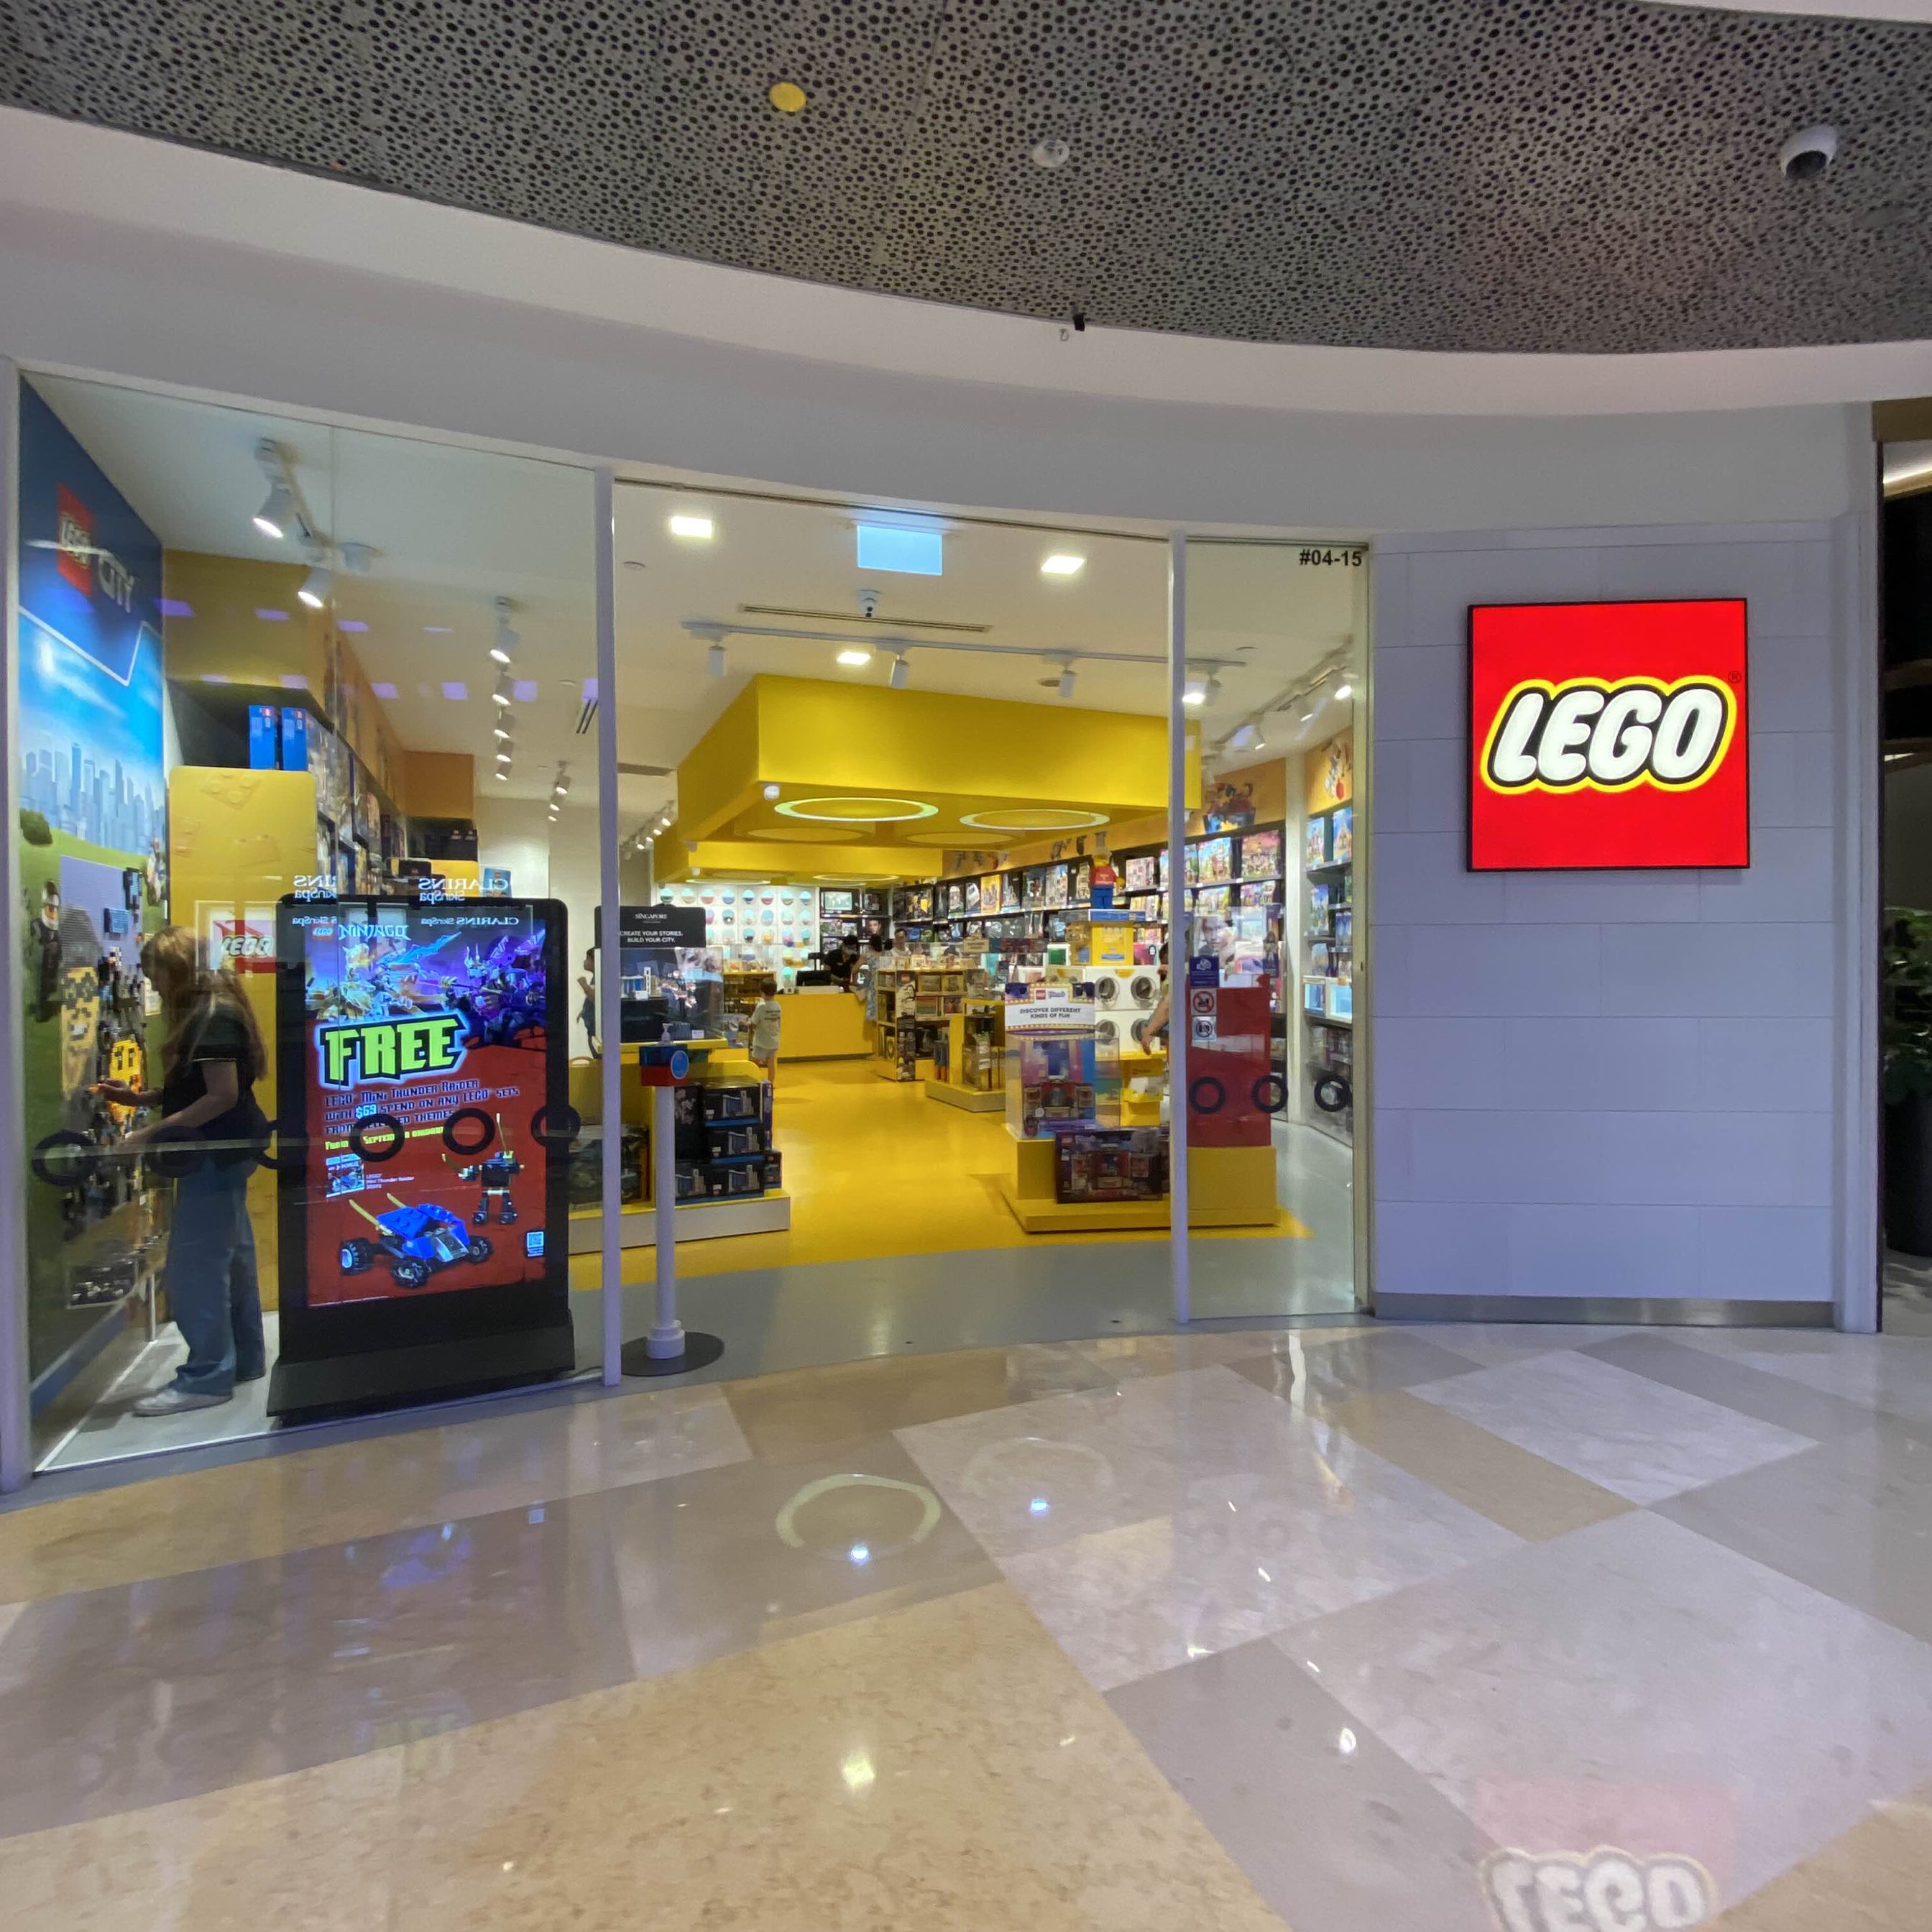 LEGO store, Orchard | Singapore Travelogues